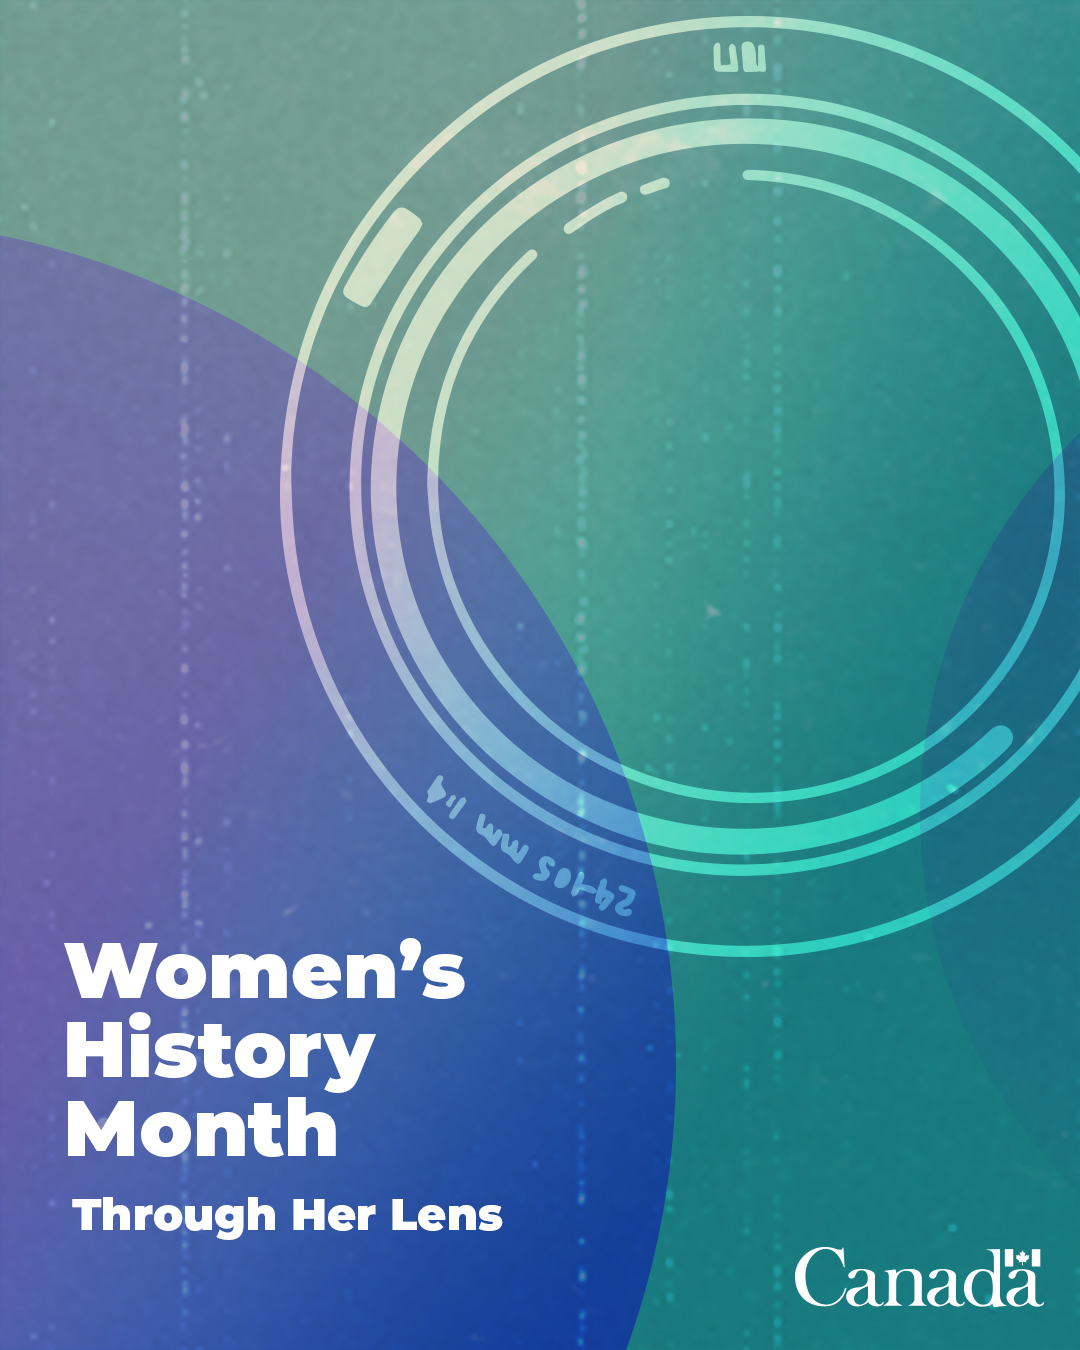 Women's History Month image for Instagram